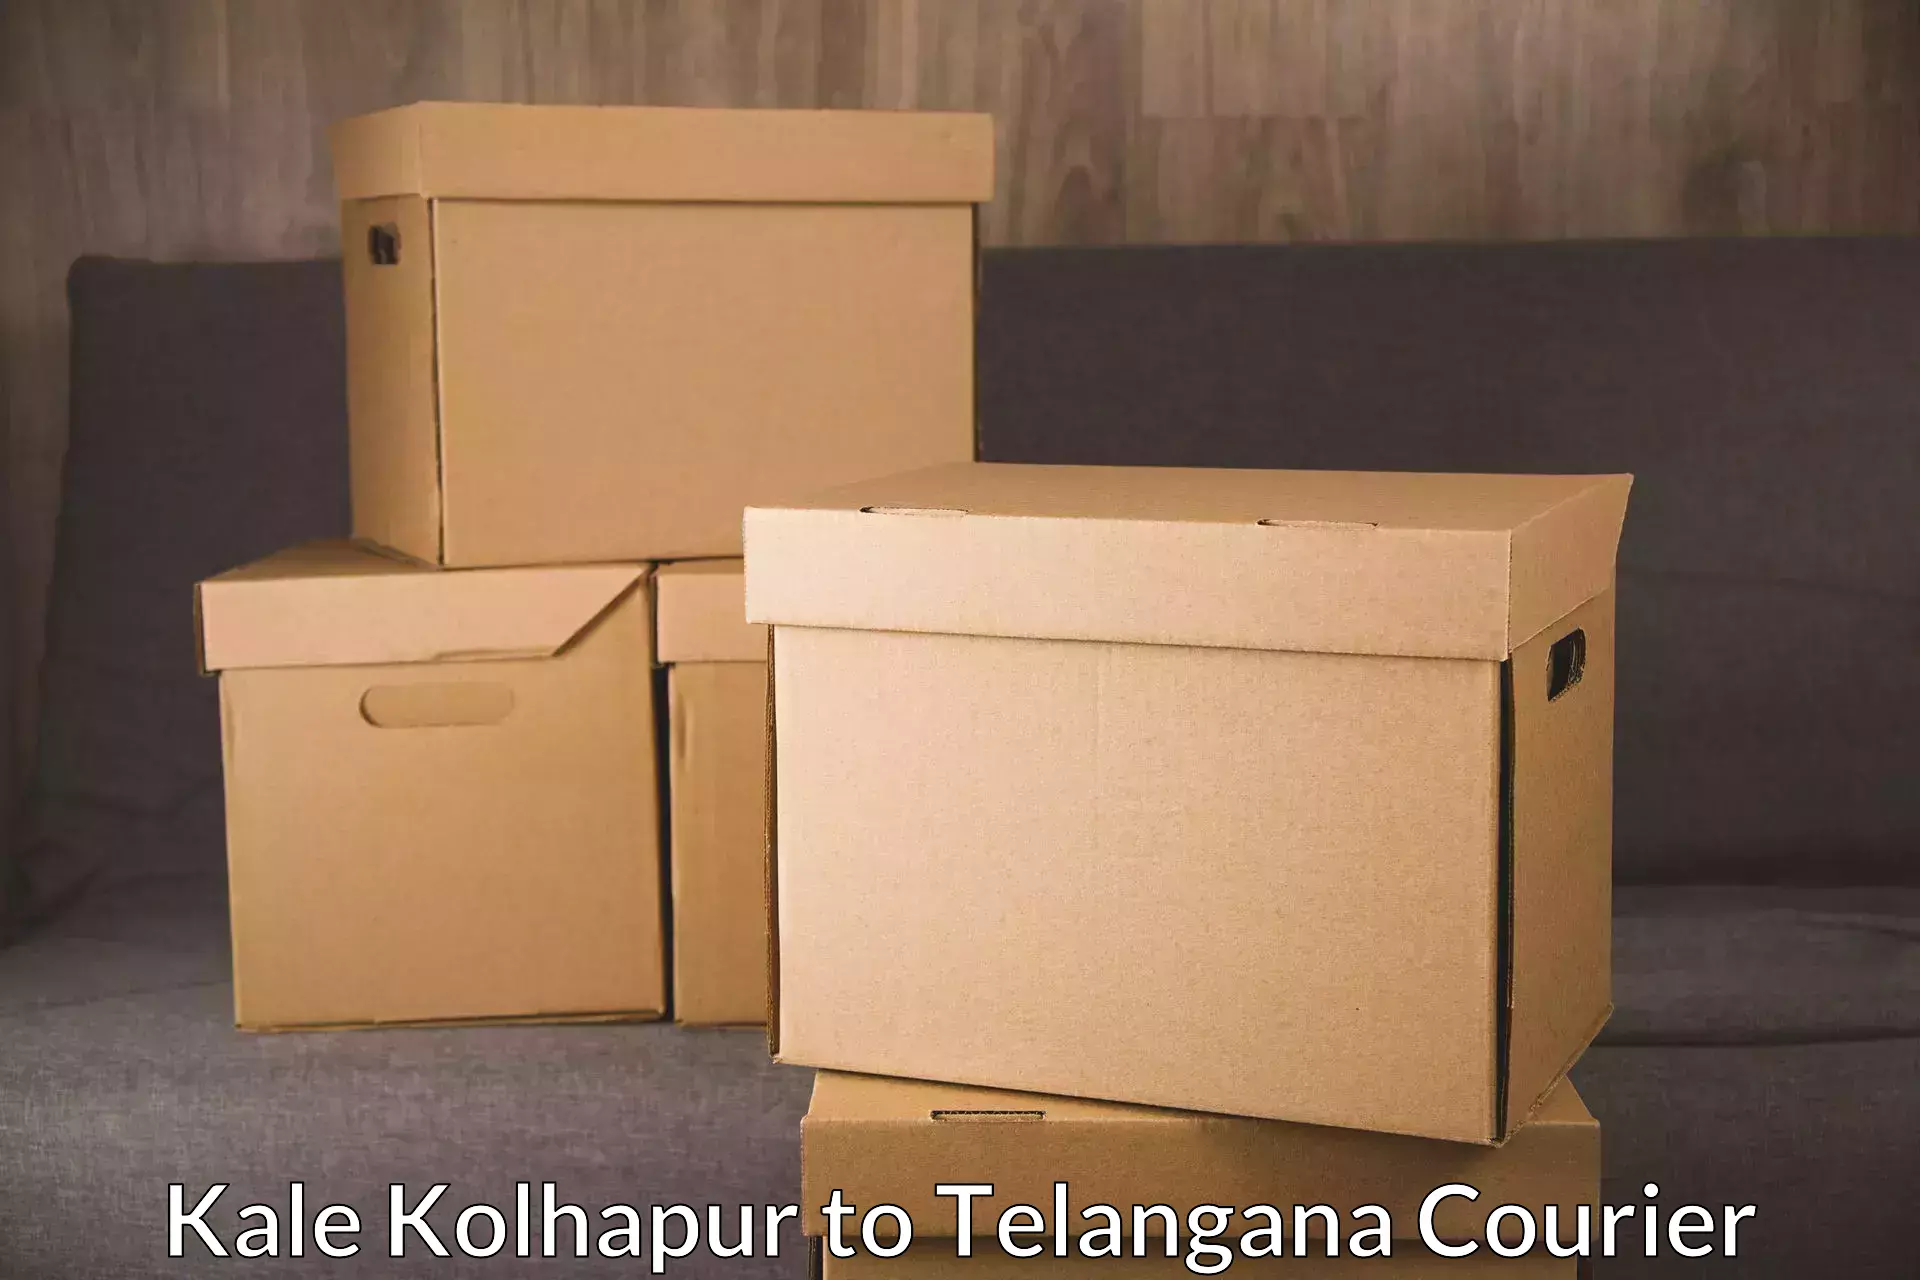 Nationwide courier service Kale Kolhapur to Vemulawada